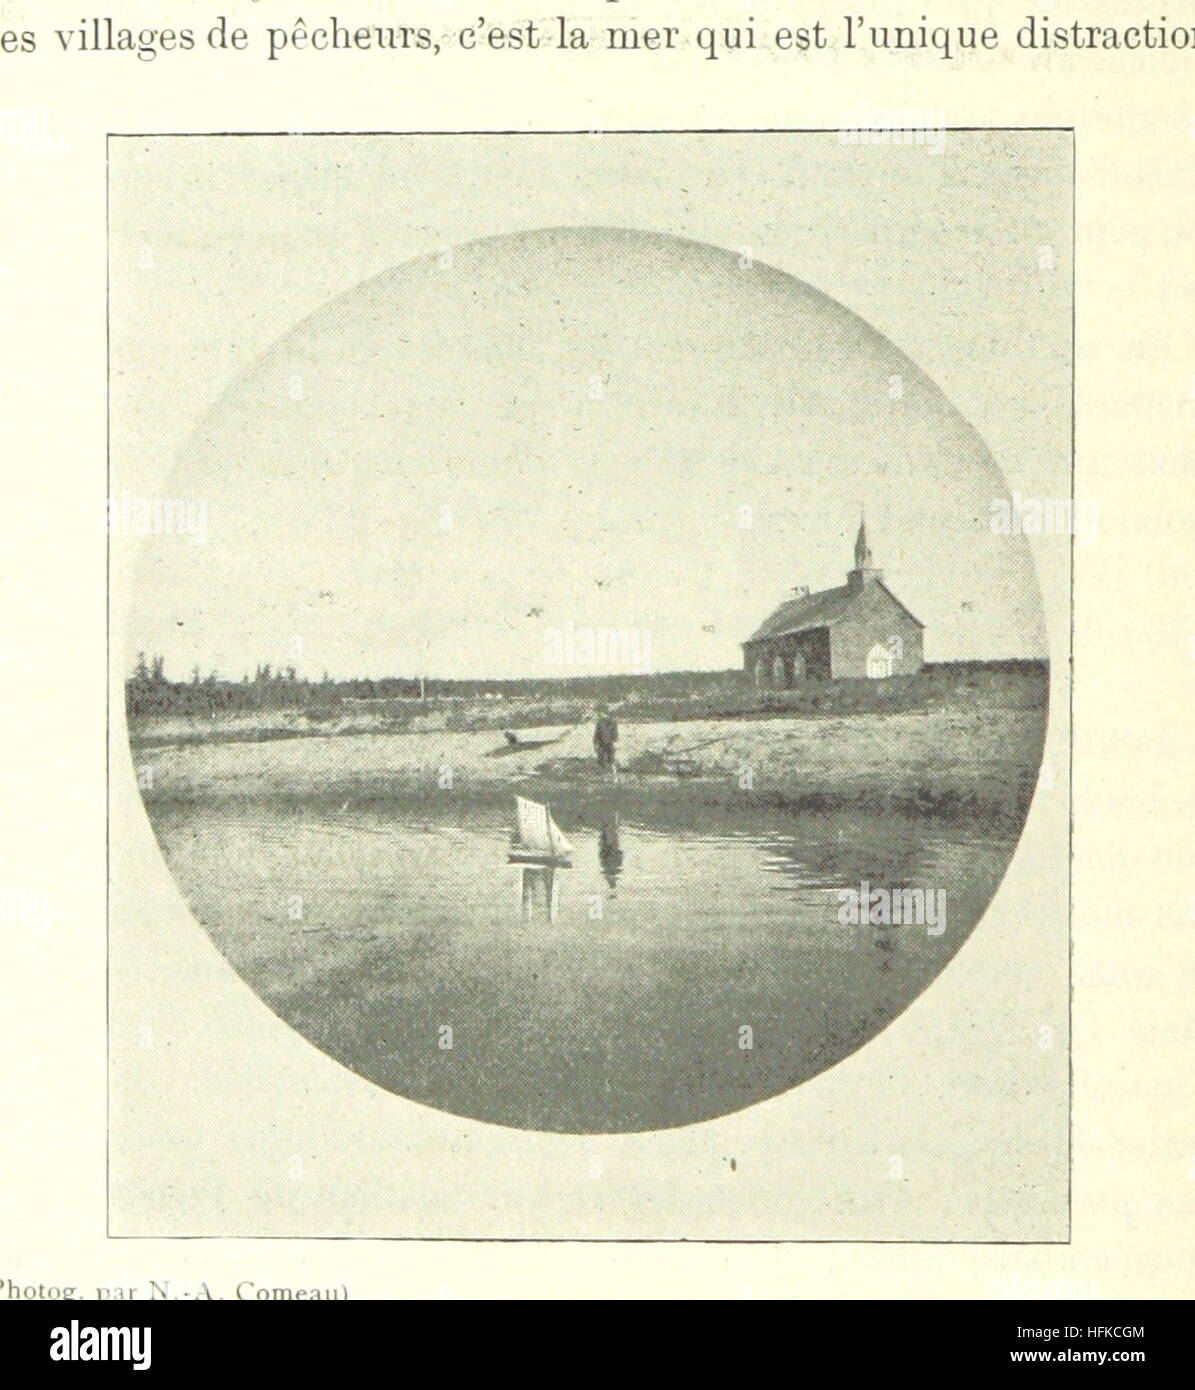 Image taken from page 120 of 'Labrador et Anticosti. Journal de voyage. Histoire, Topographie, etc. [With map.]' Image taken from page 120 of 'Labrador et Anticosti Journal Stock Photo